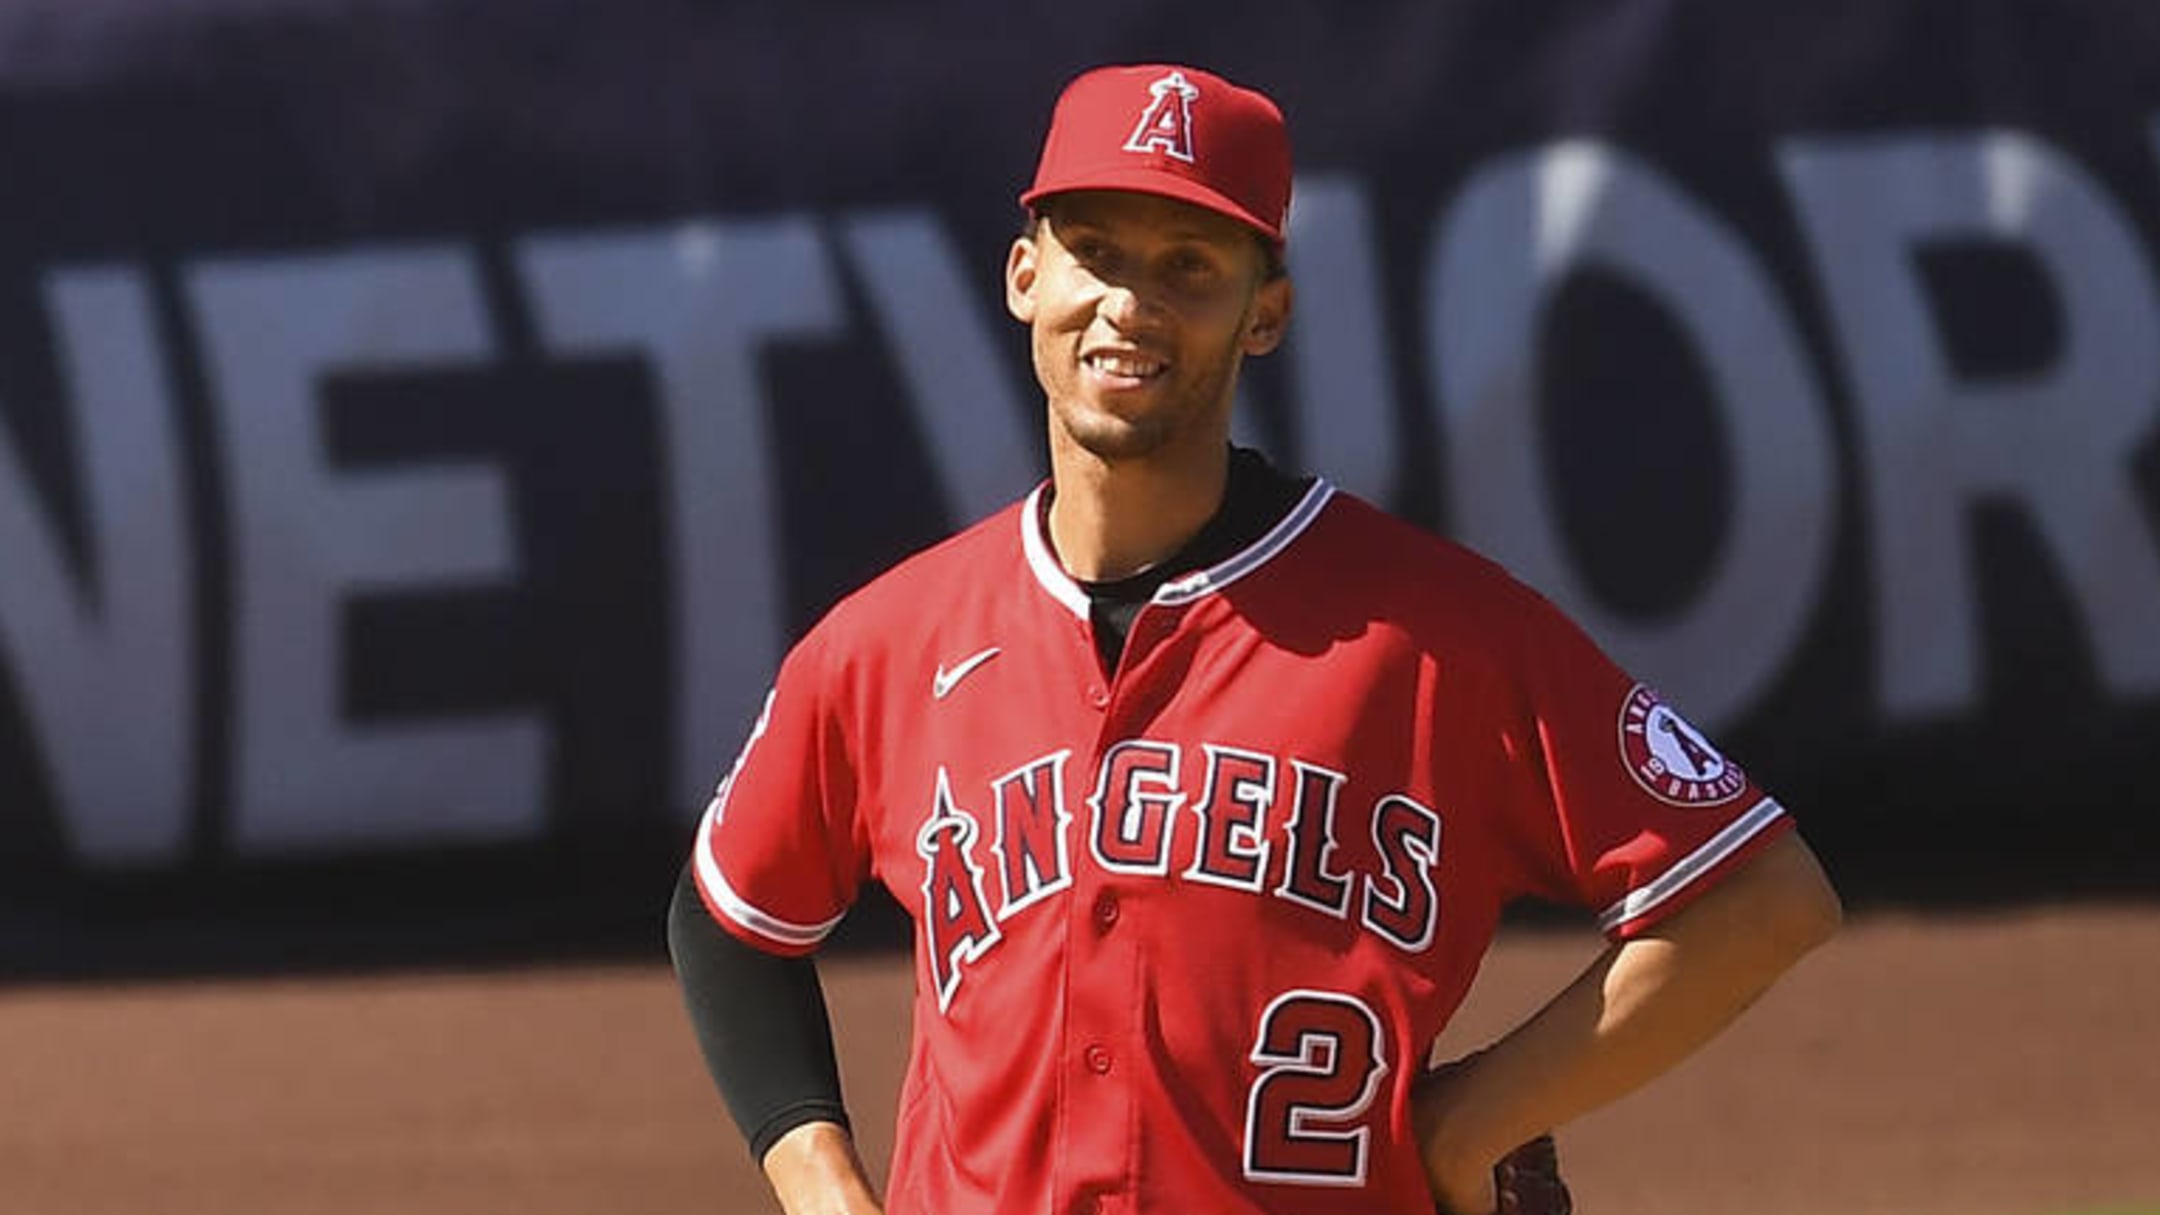 New Twins shortstop Andrelton Simmons is a dazzling defender